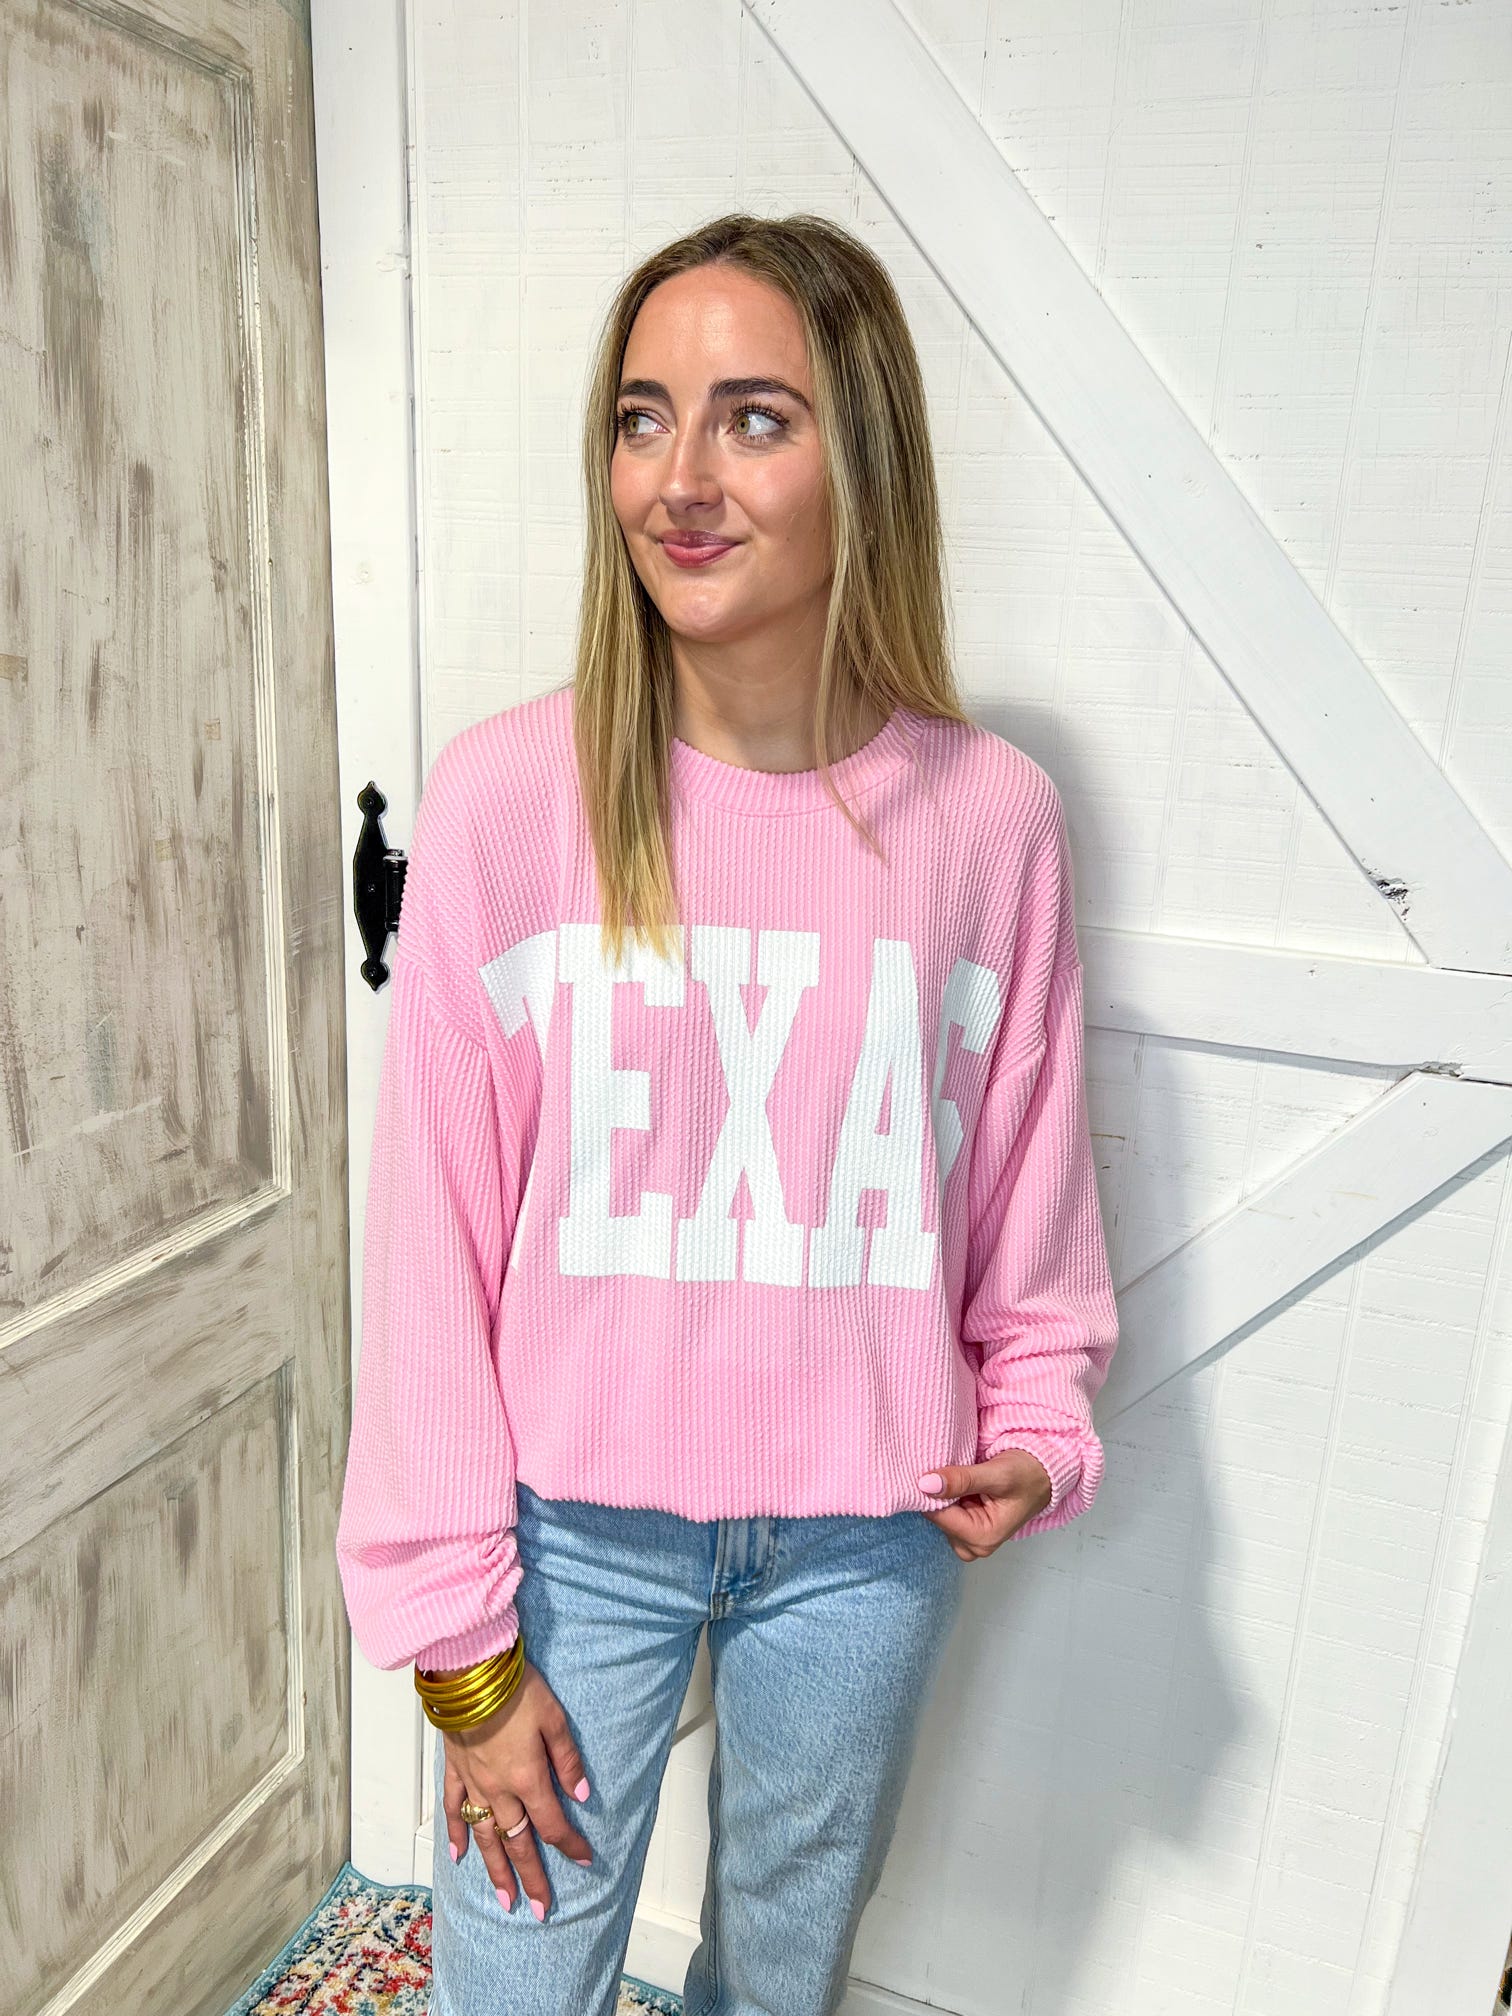 Another view of a woman modeling our light pink Texas sweatshirt with large white bold letters saying TEXAS across the front